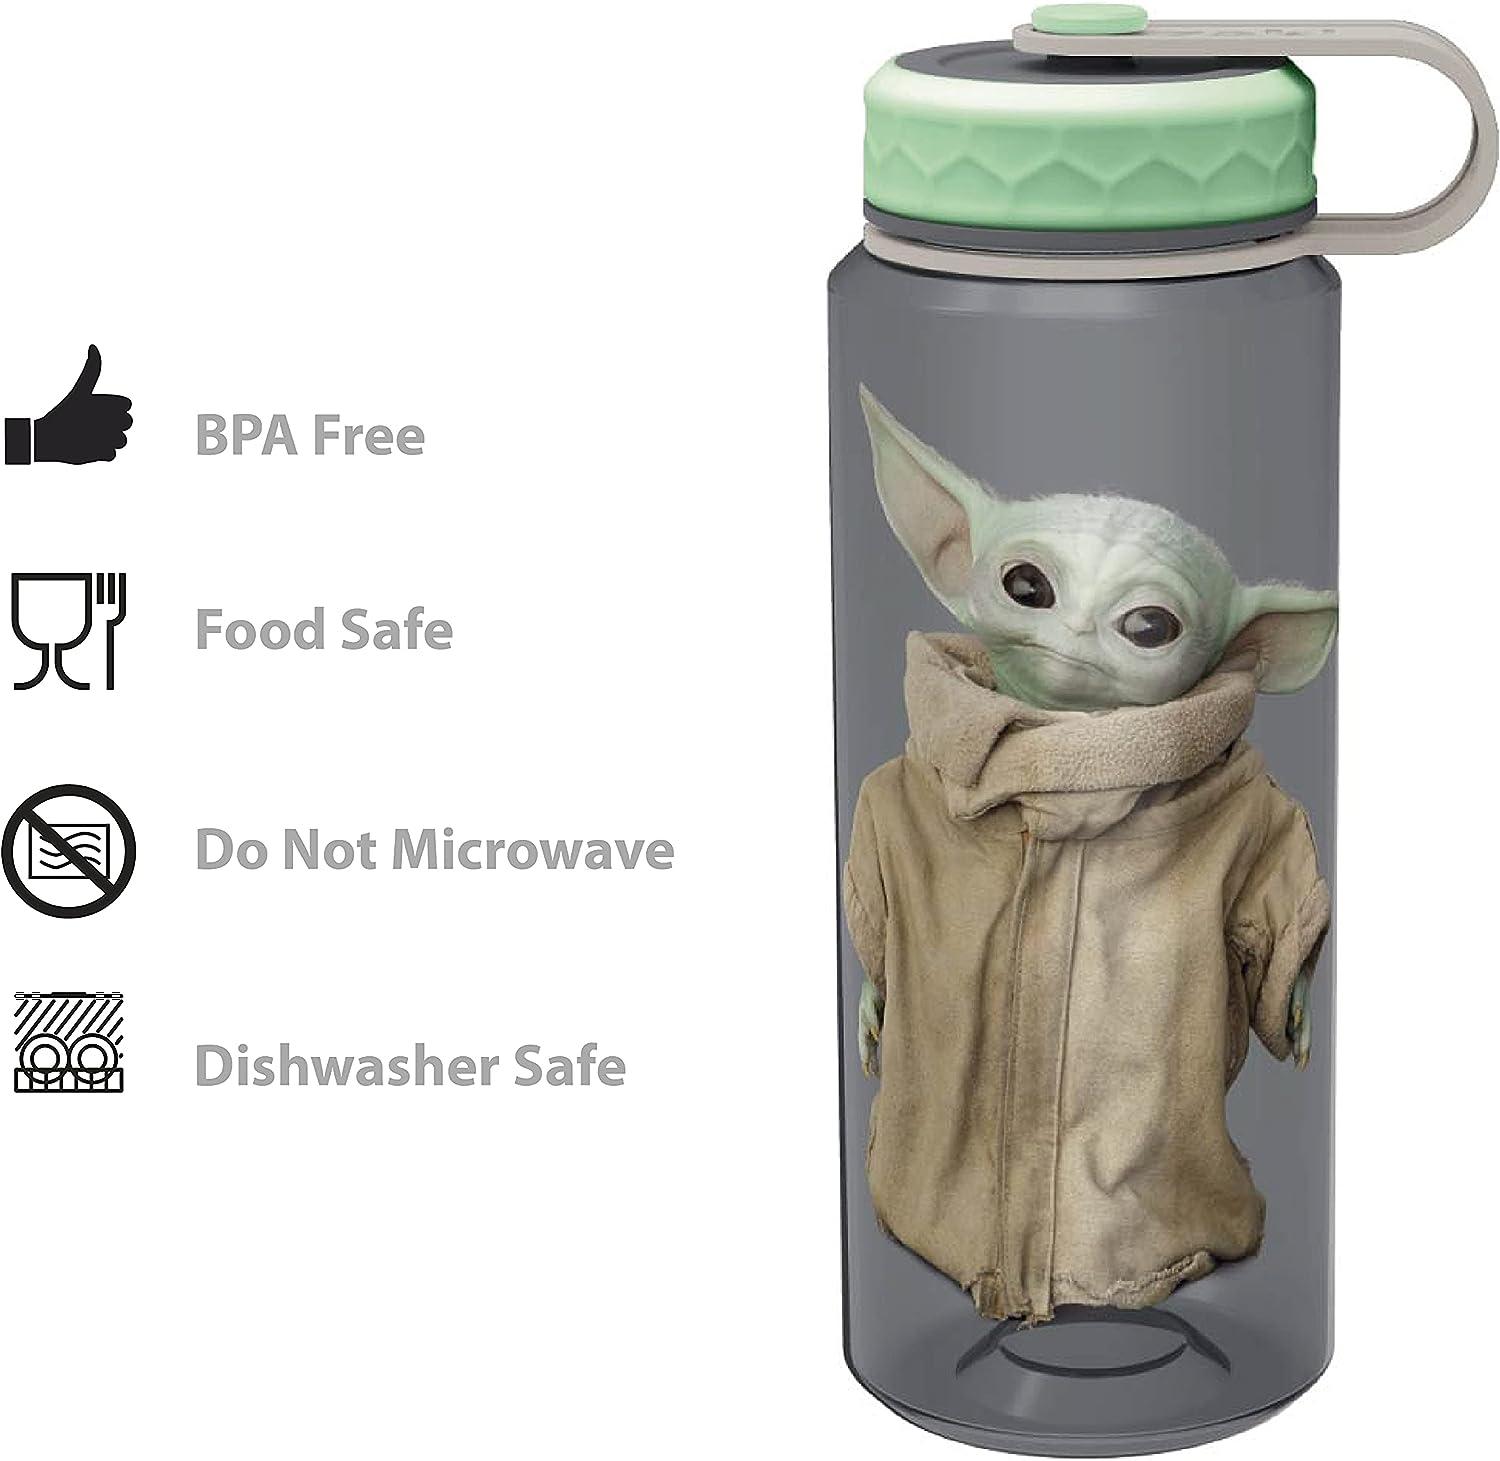 Disney Star Wars 9 Reusable Plastic Straw Set with Baby Yoda Cleaning Brush  - Pack of 9 with 2 Straw Designs - Suitable for a variety of cups and